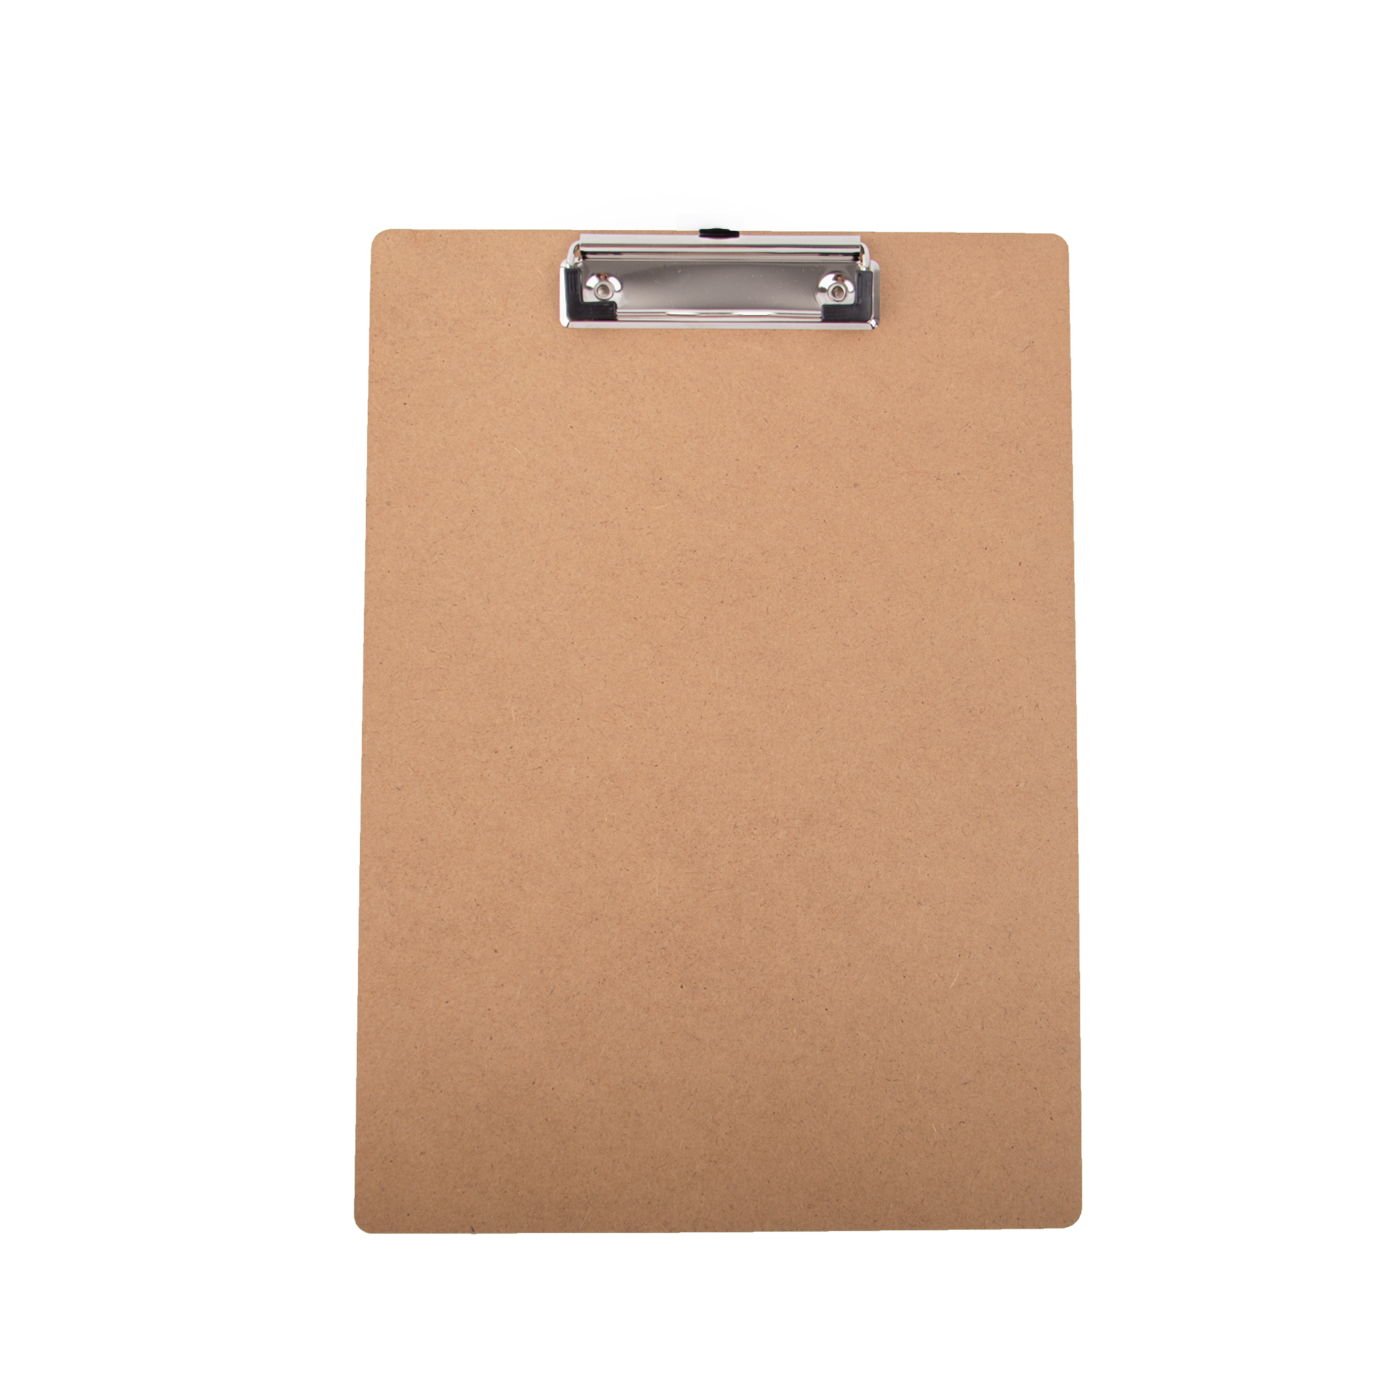 A4 MDF Wooden Clipboard With Hanging Hole2